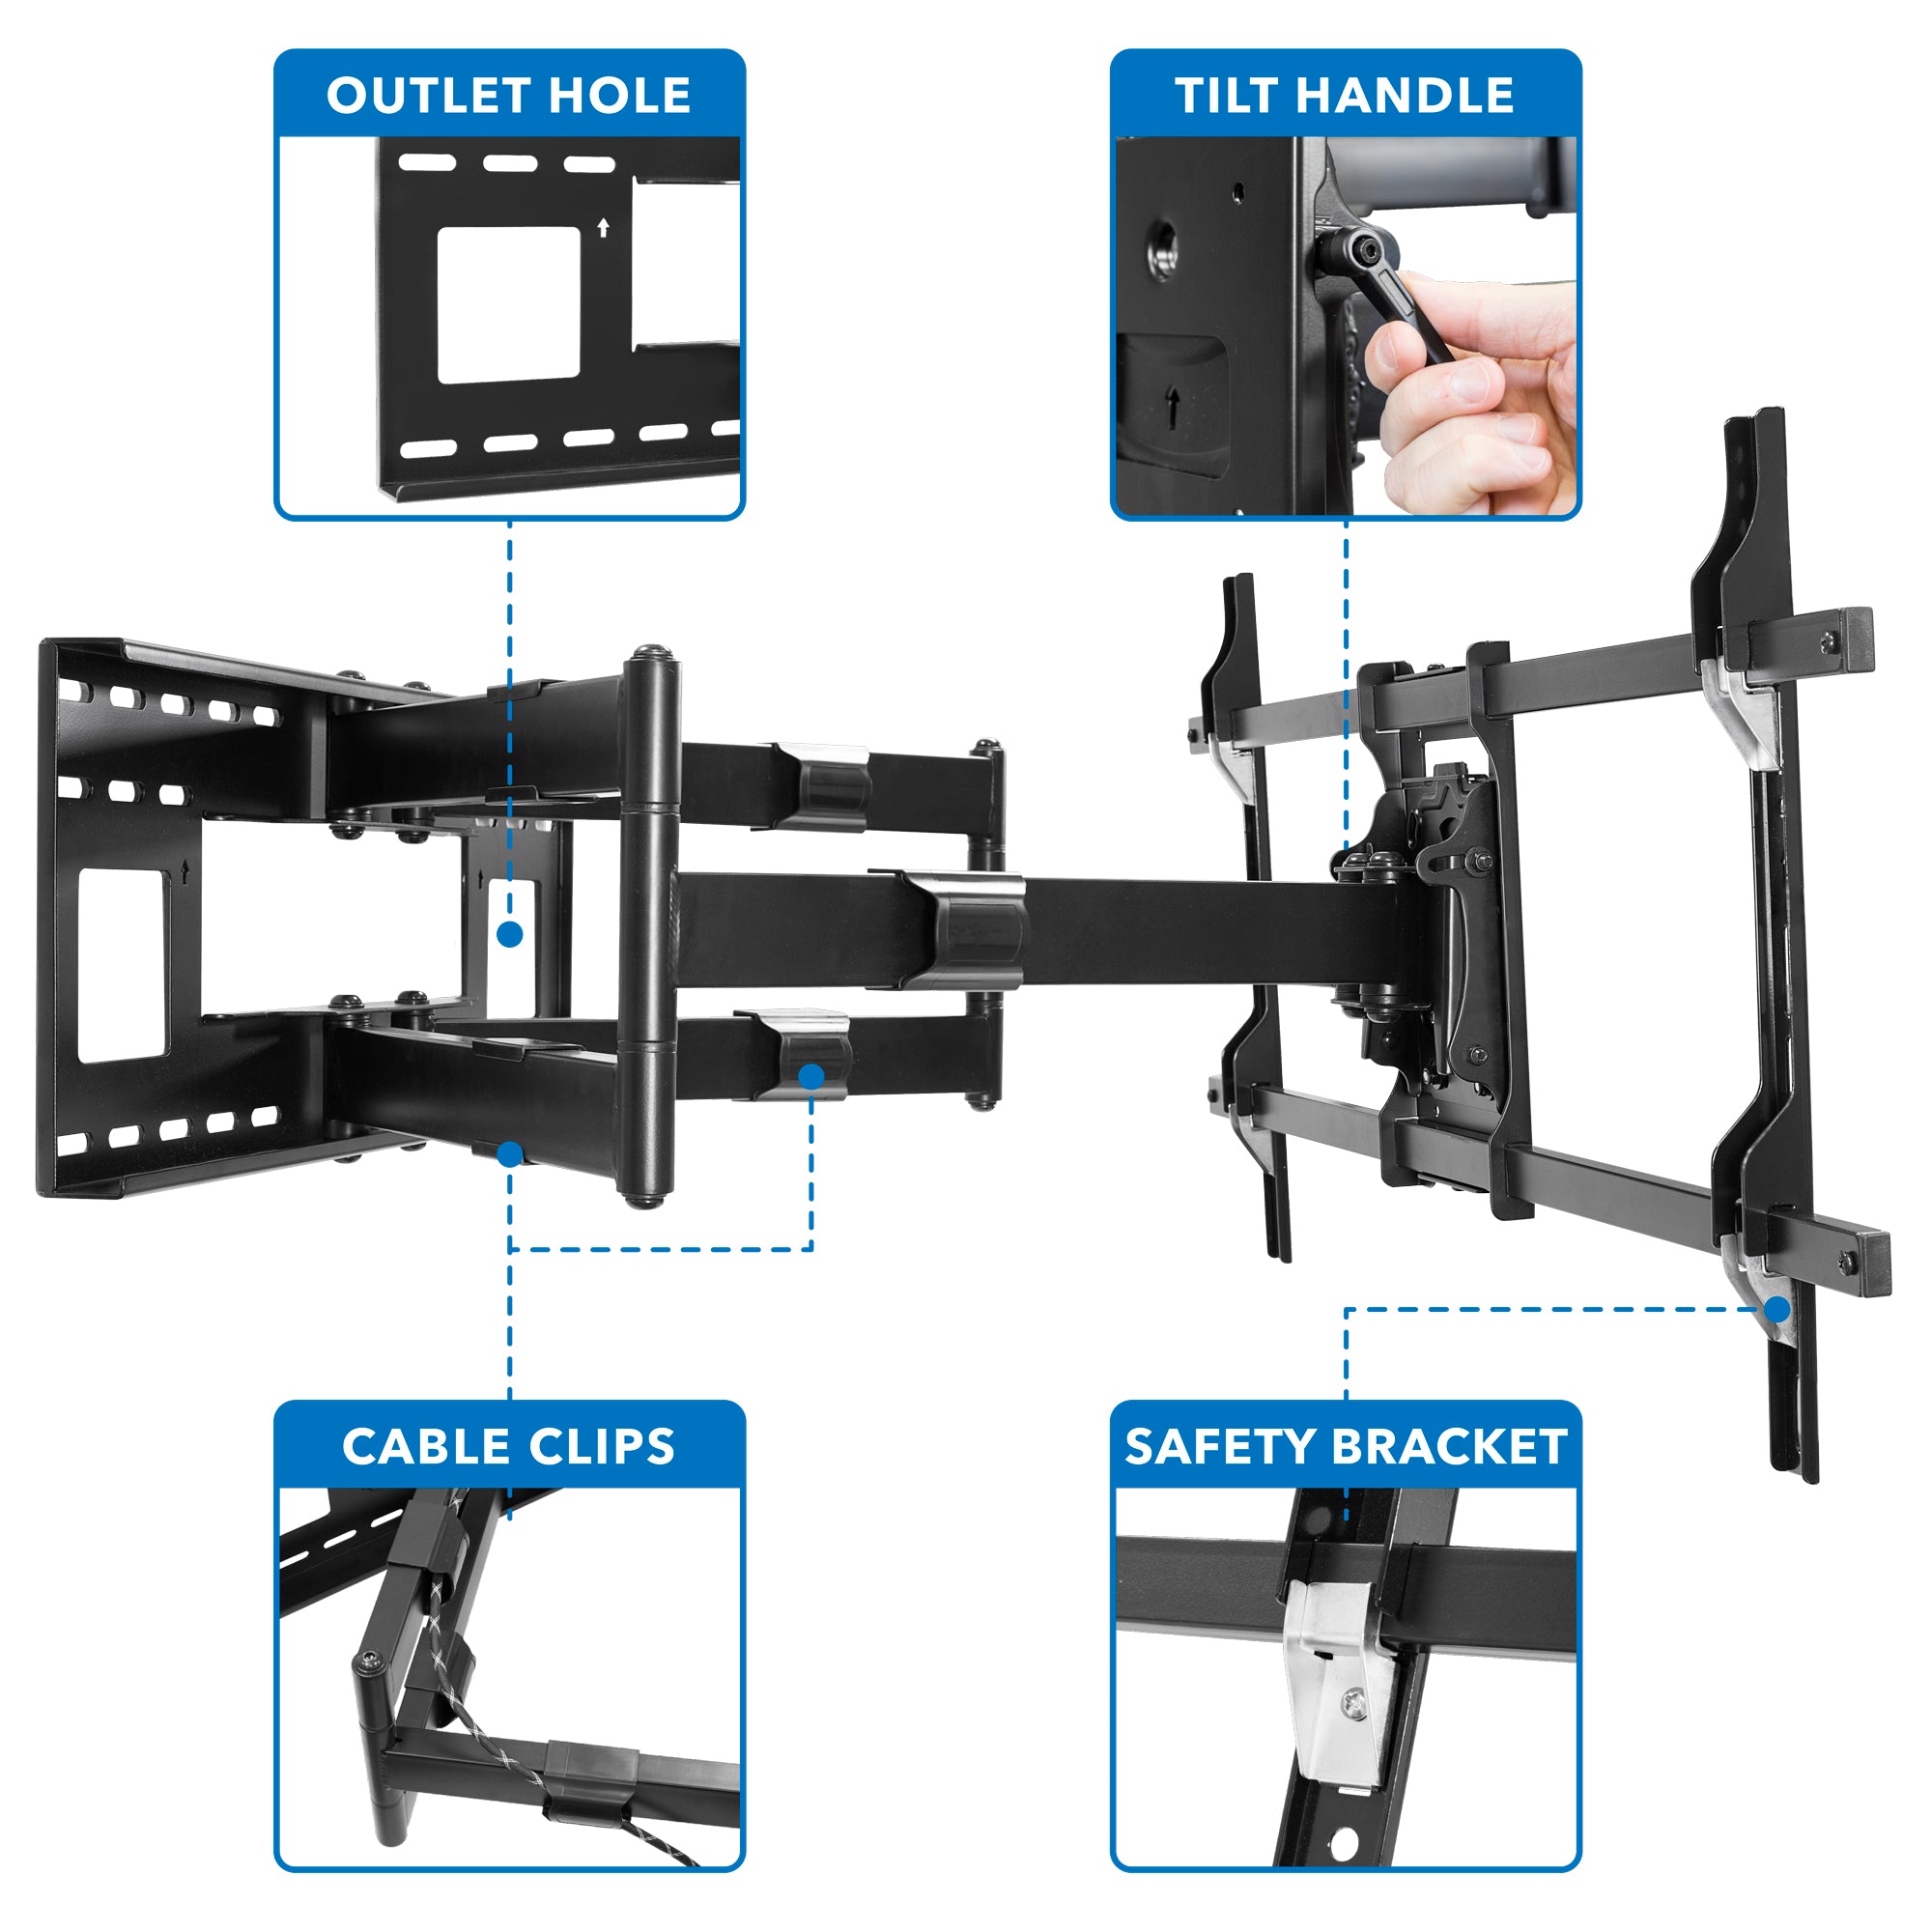 Heavy-Duty Dual-Arm Articulating Wall Mount with Long Extension